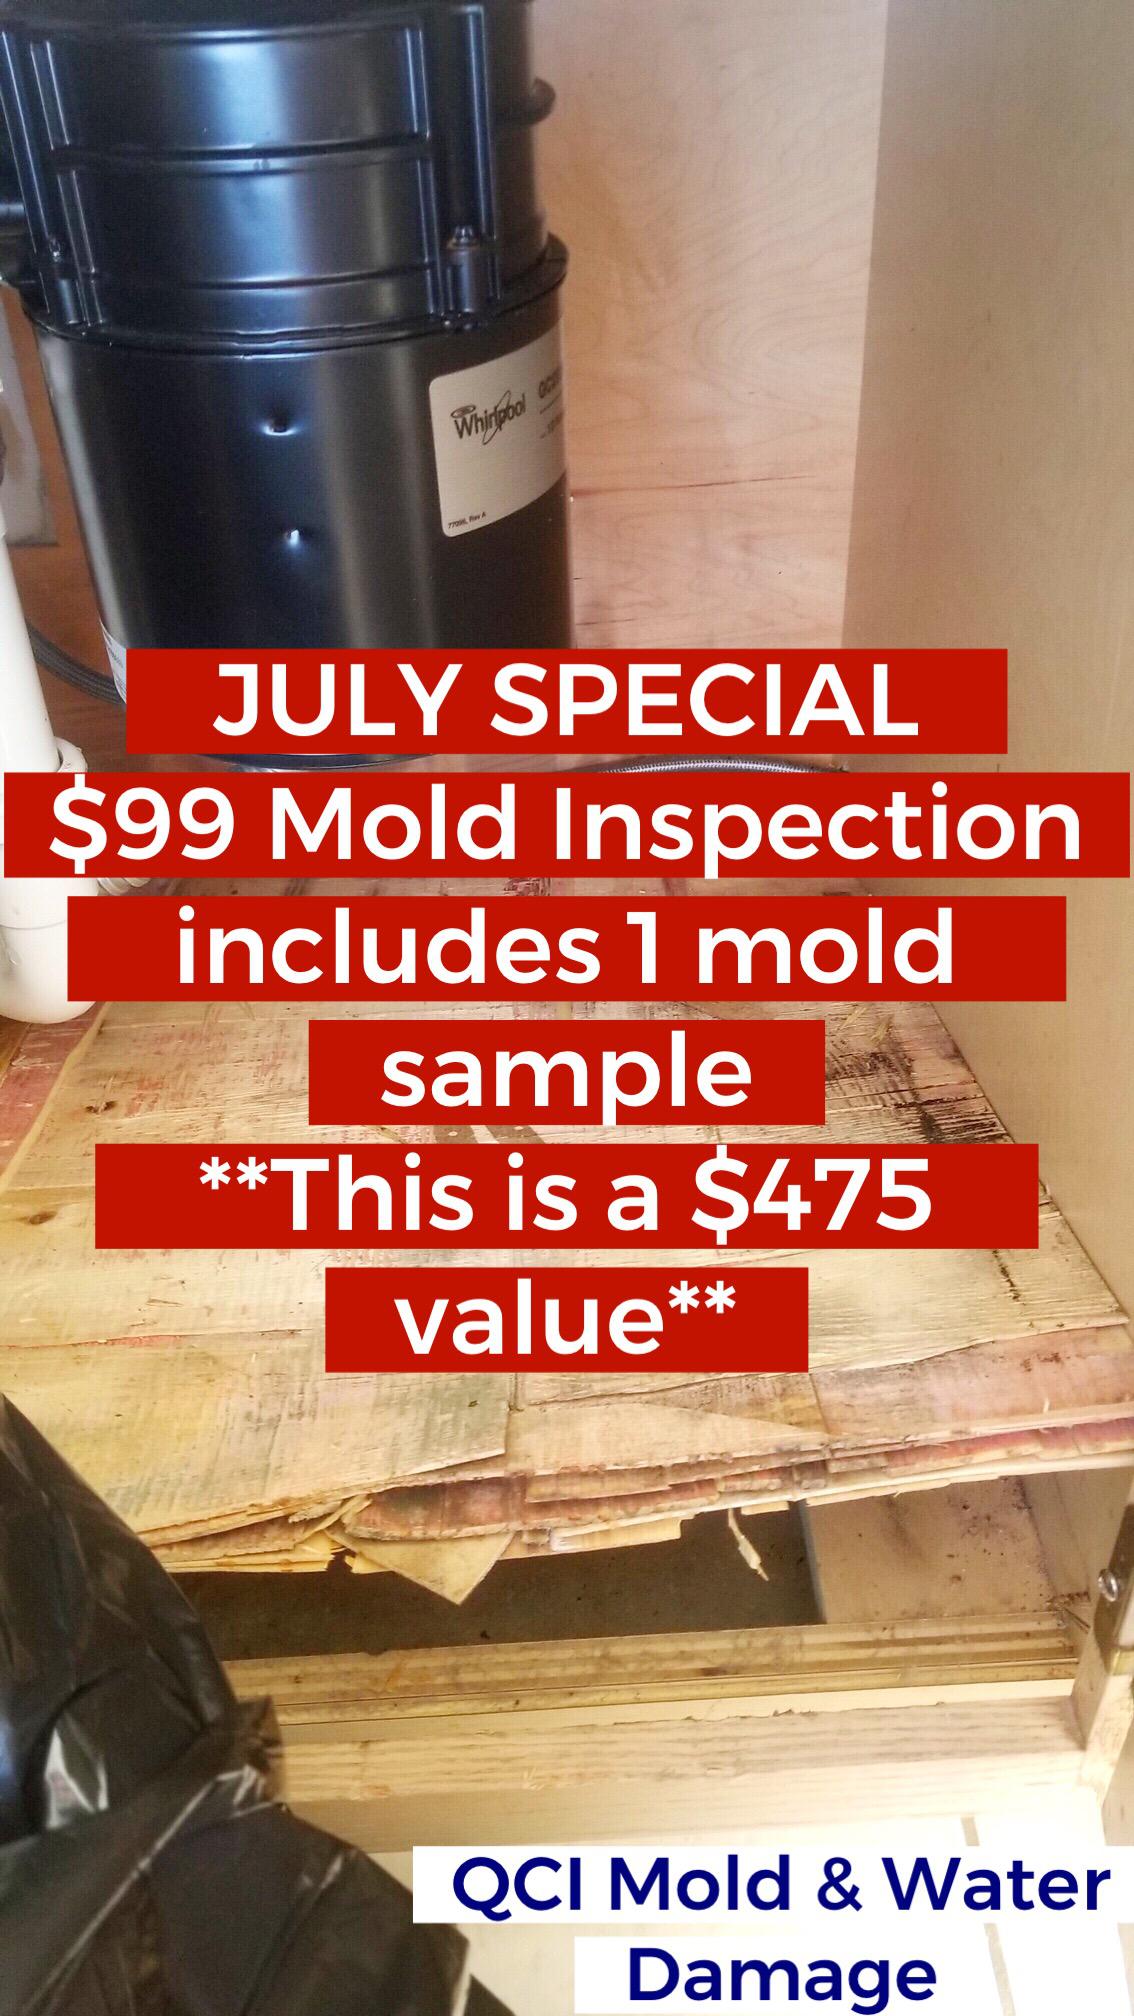 JULY SPECIAL!
Think you may have a mold issue? Need a mold inspection or testing? 

Limited Time Off QCI Mold and Water Damage Naples (239)777-2875